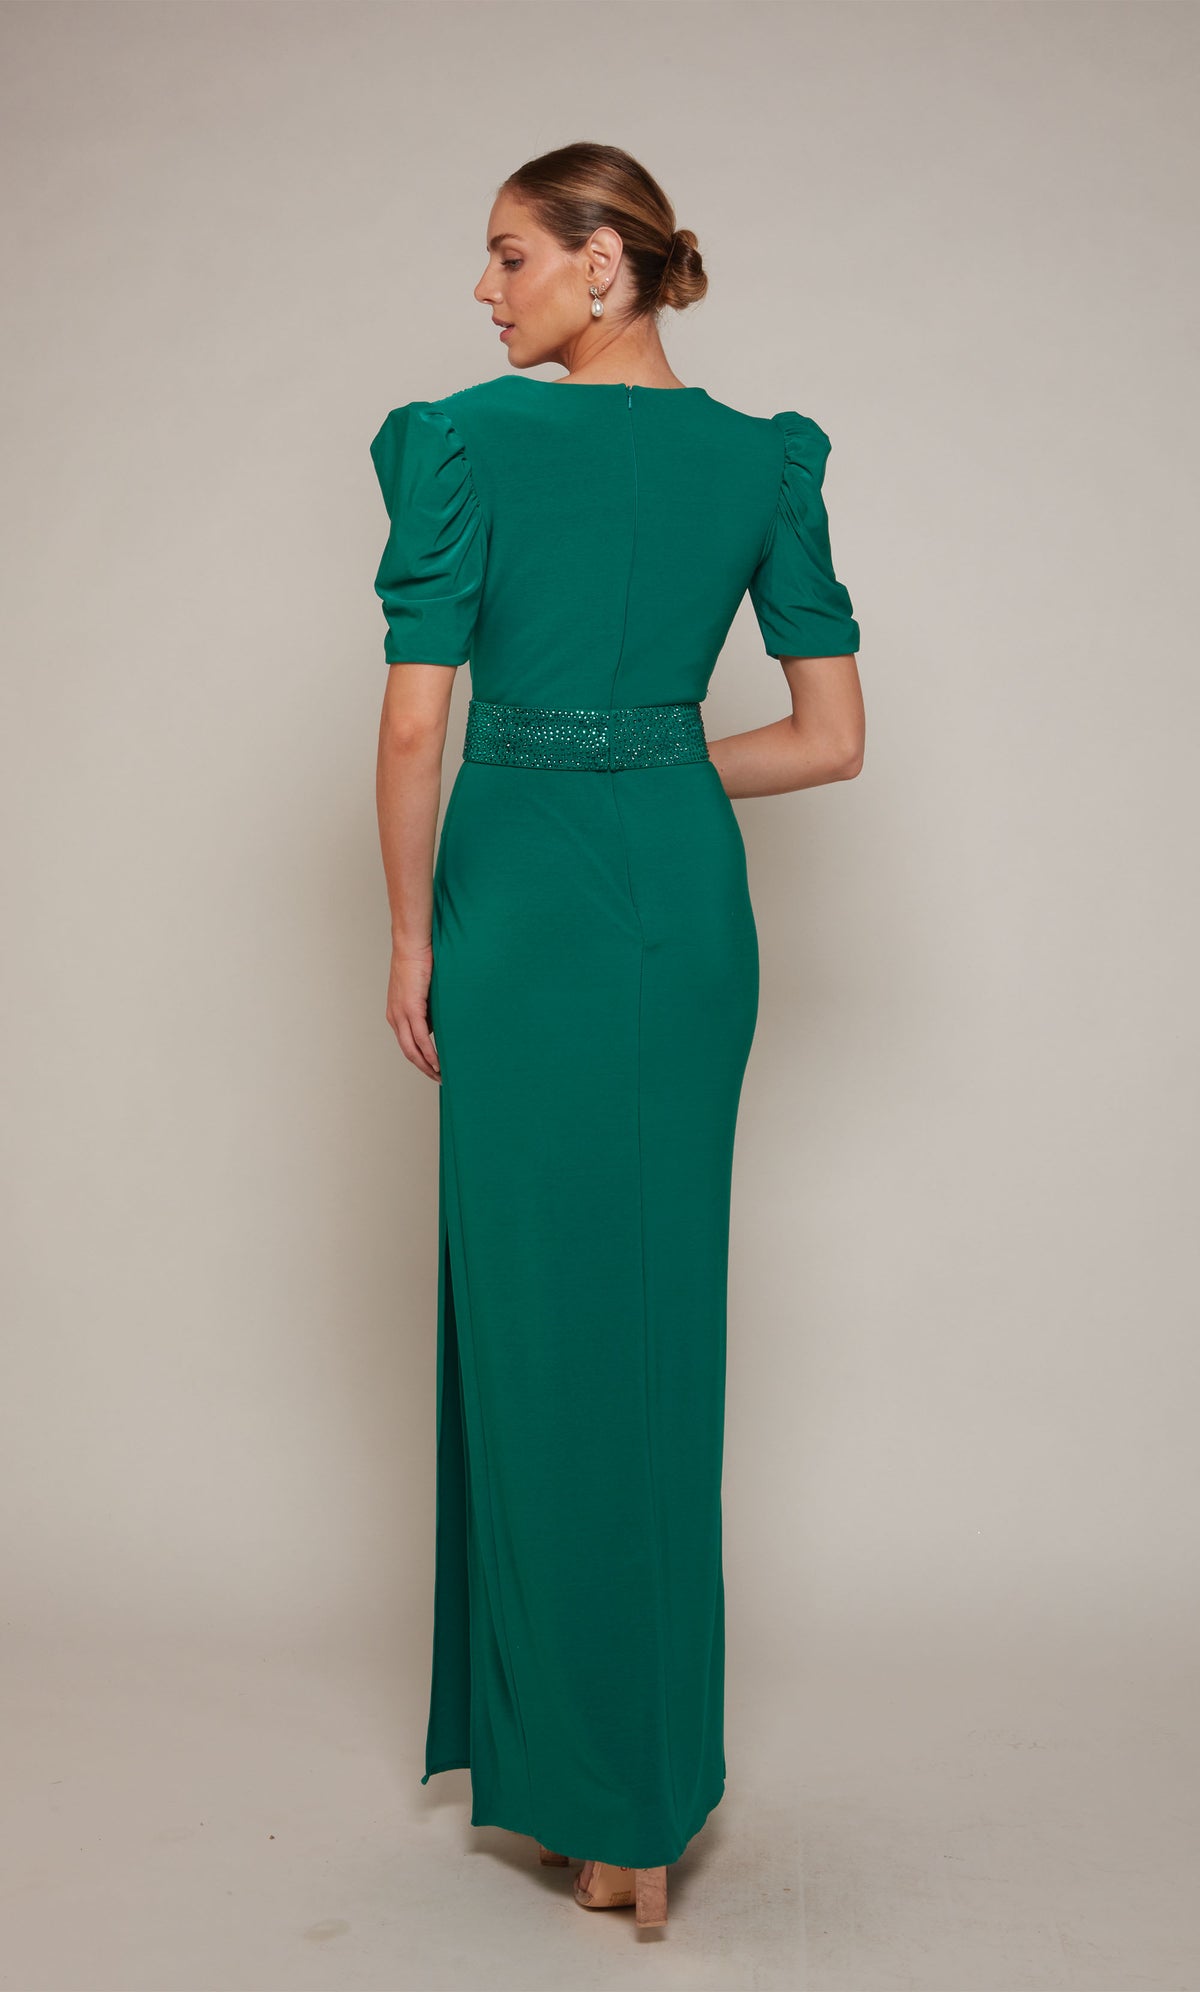 An emerald evening gown with puff sleeves, a closed zipper back, an embellished belt, and elegant side slit.